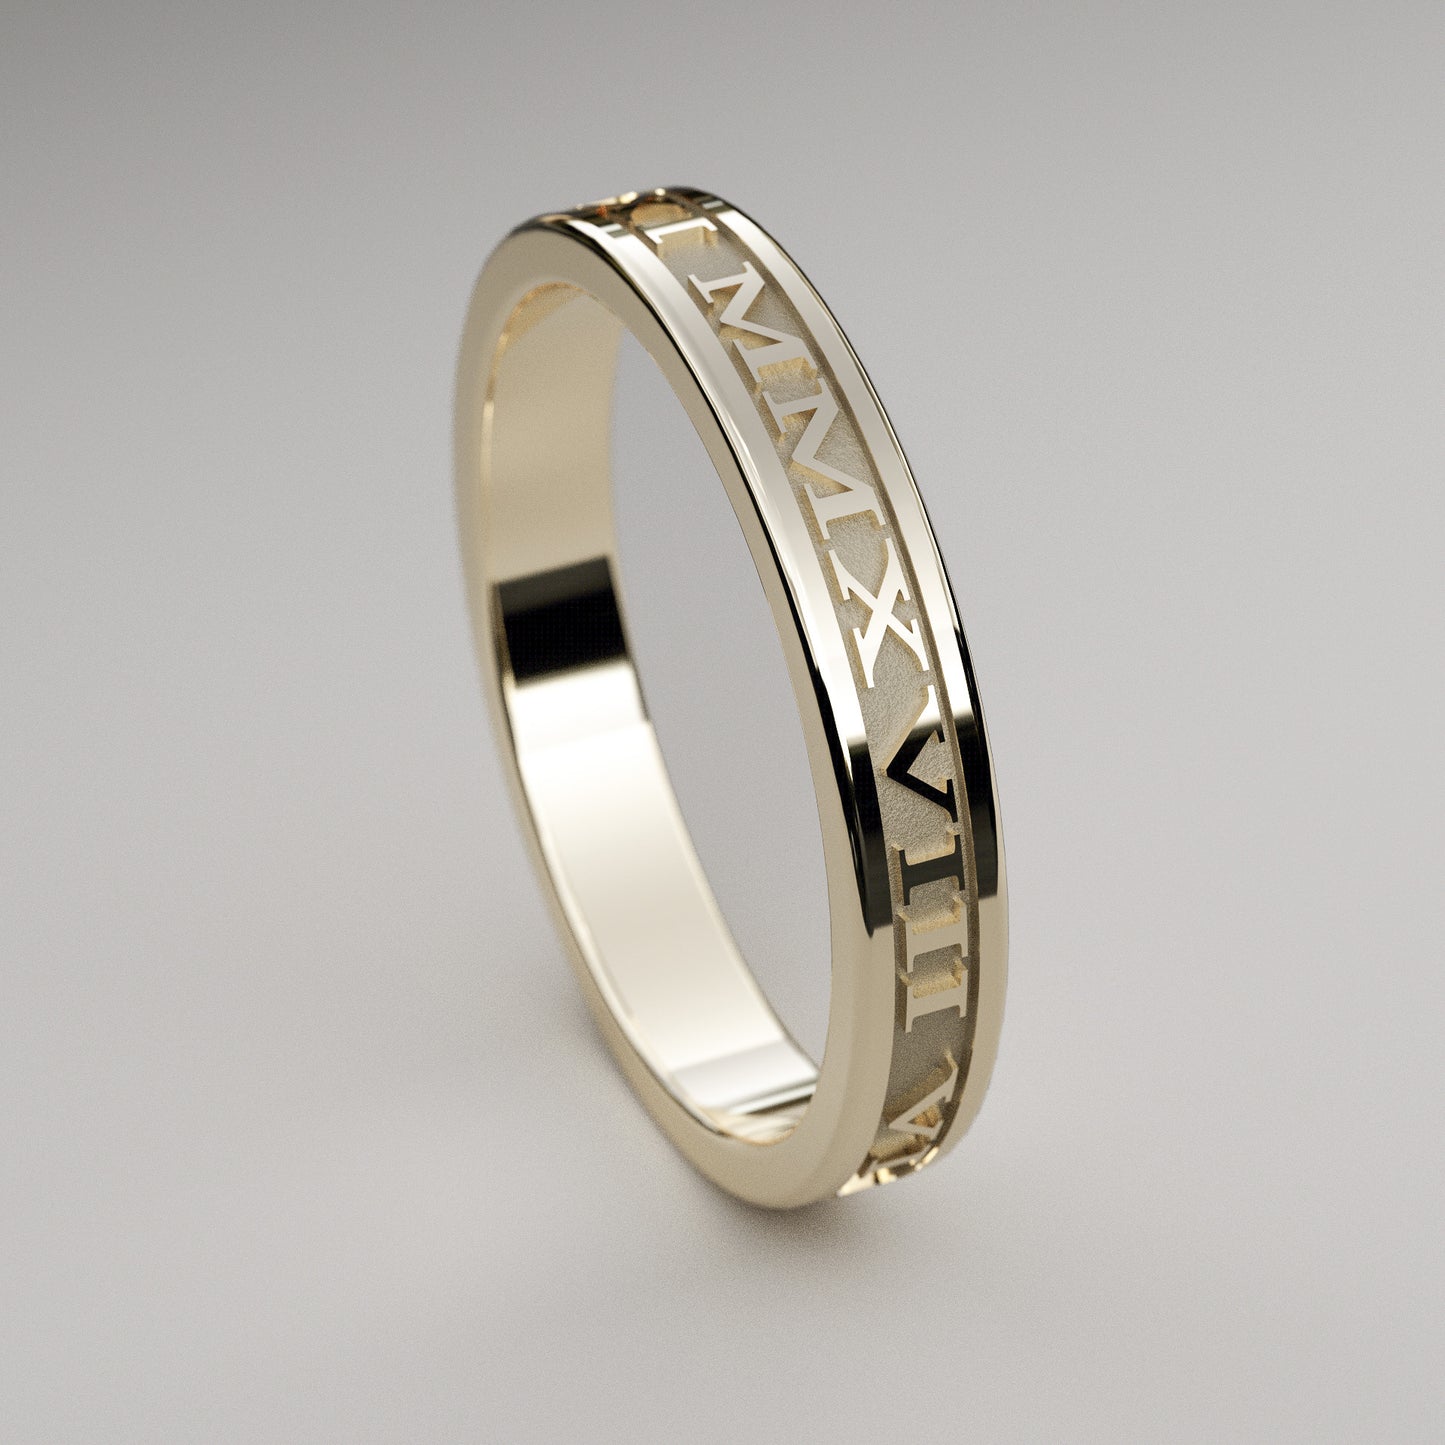 Custom date Roman Numeral ring in solid yellow gold, 3mm wide